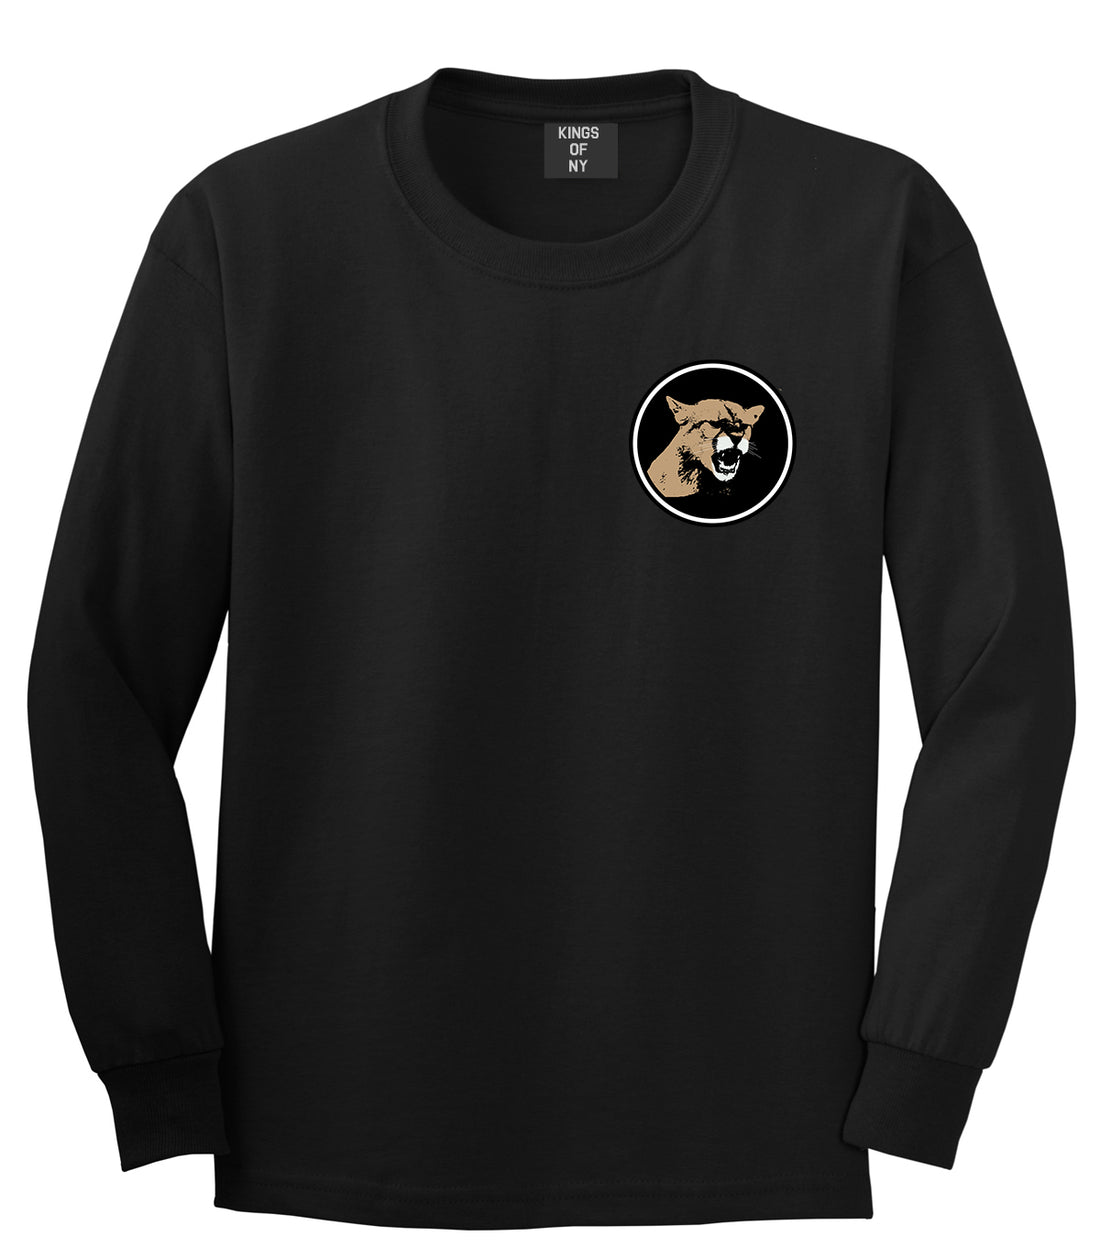 Angry Cougar Chest Black Long Sleeve T-Shirt by Kings Of NY